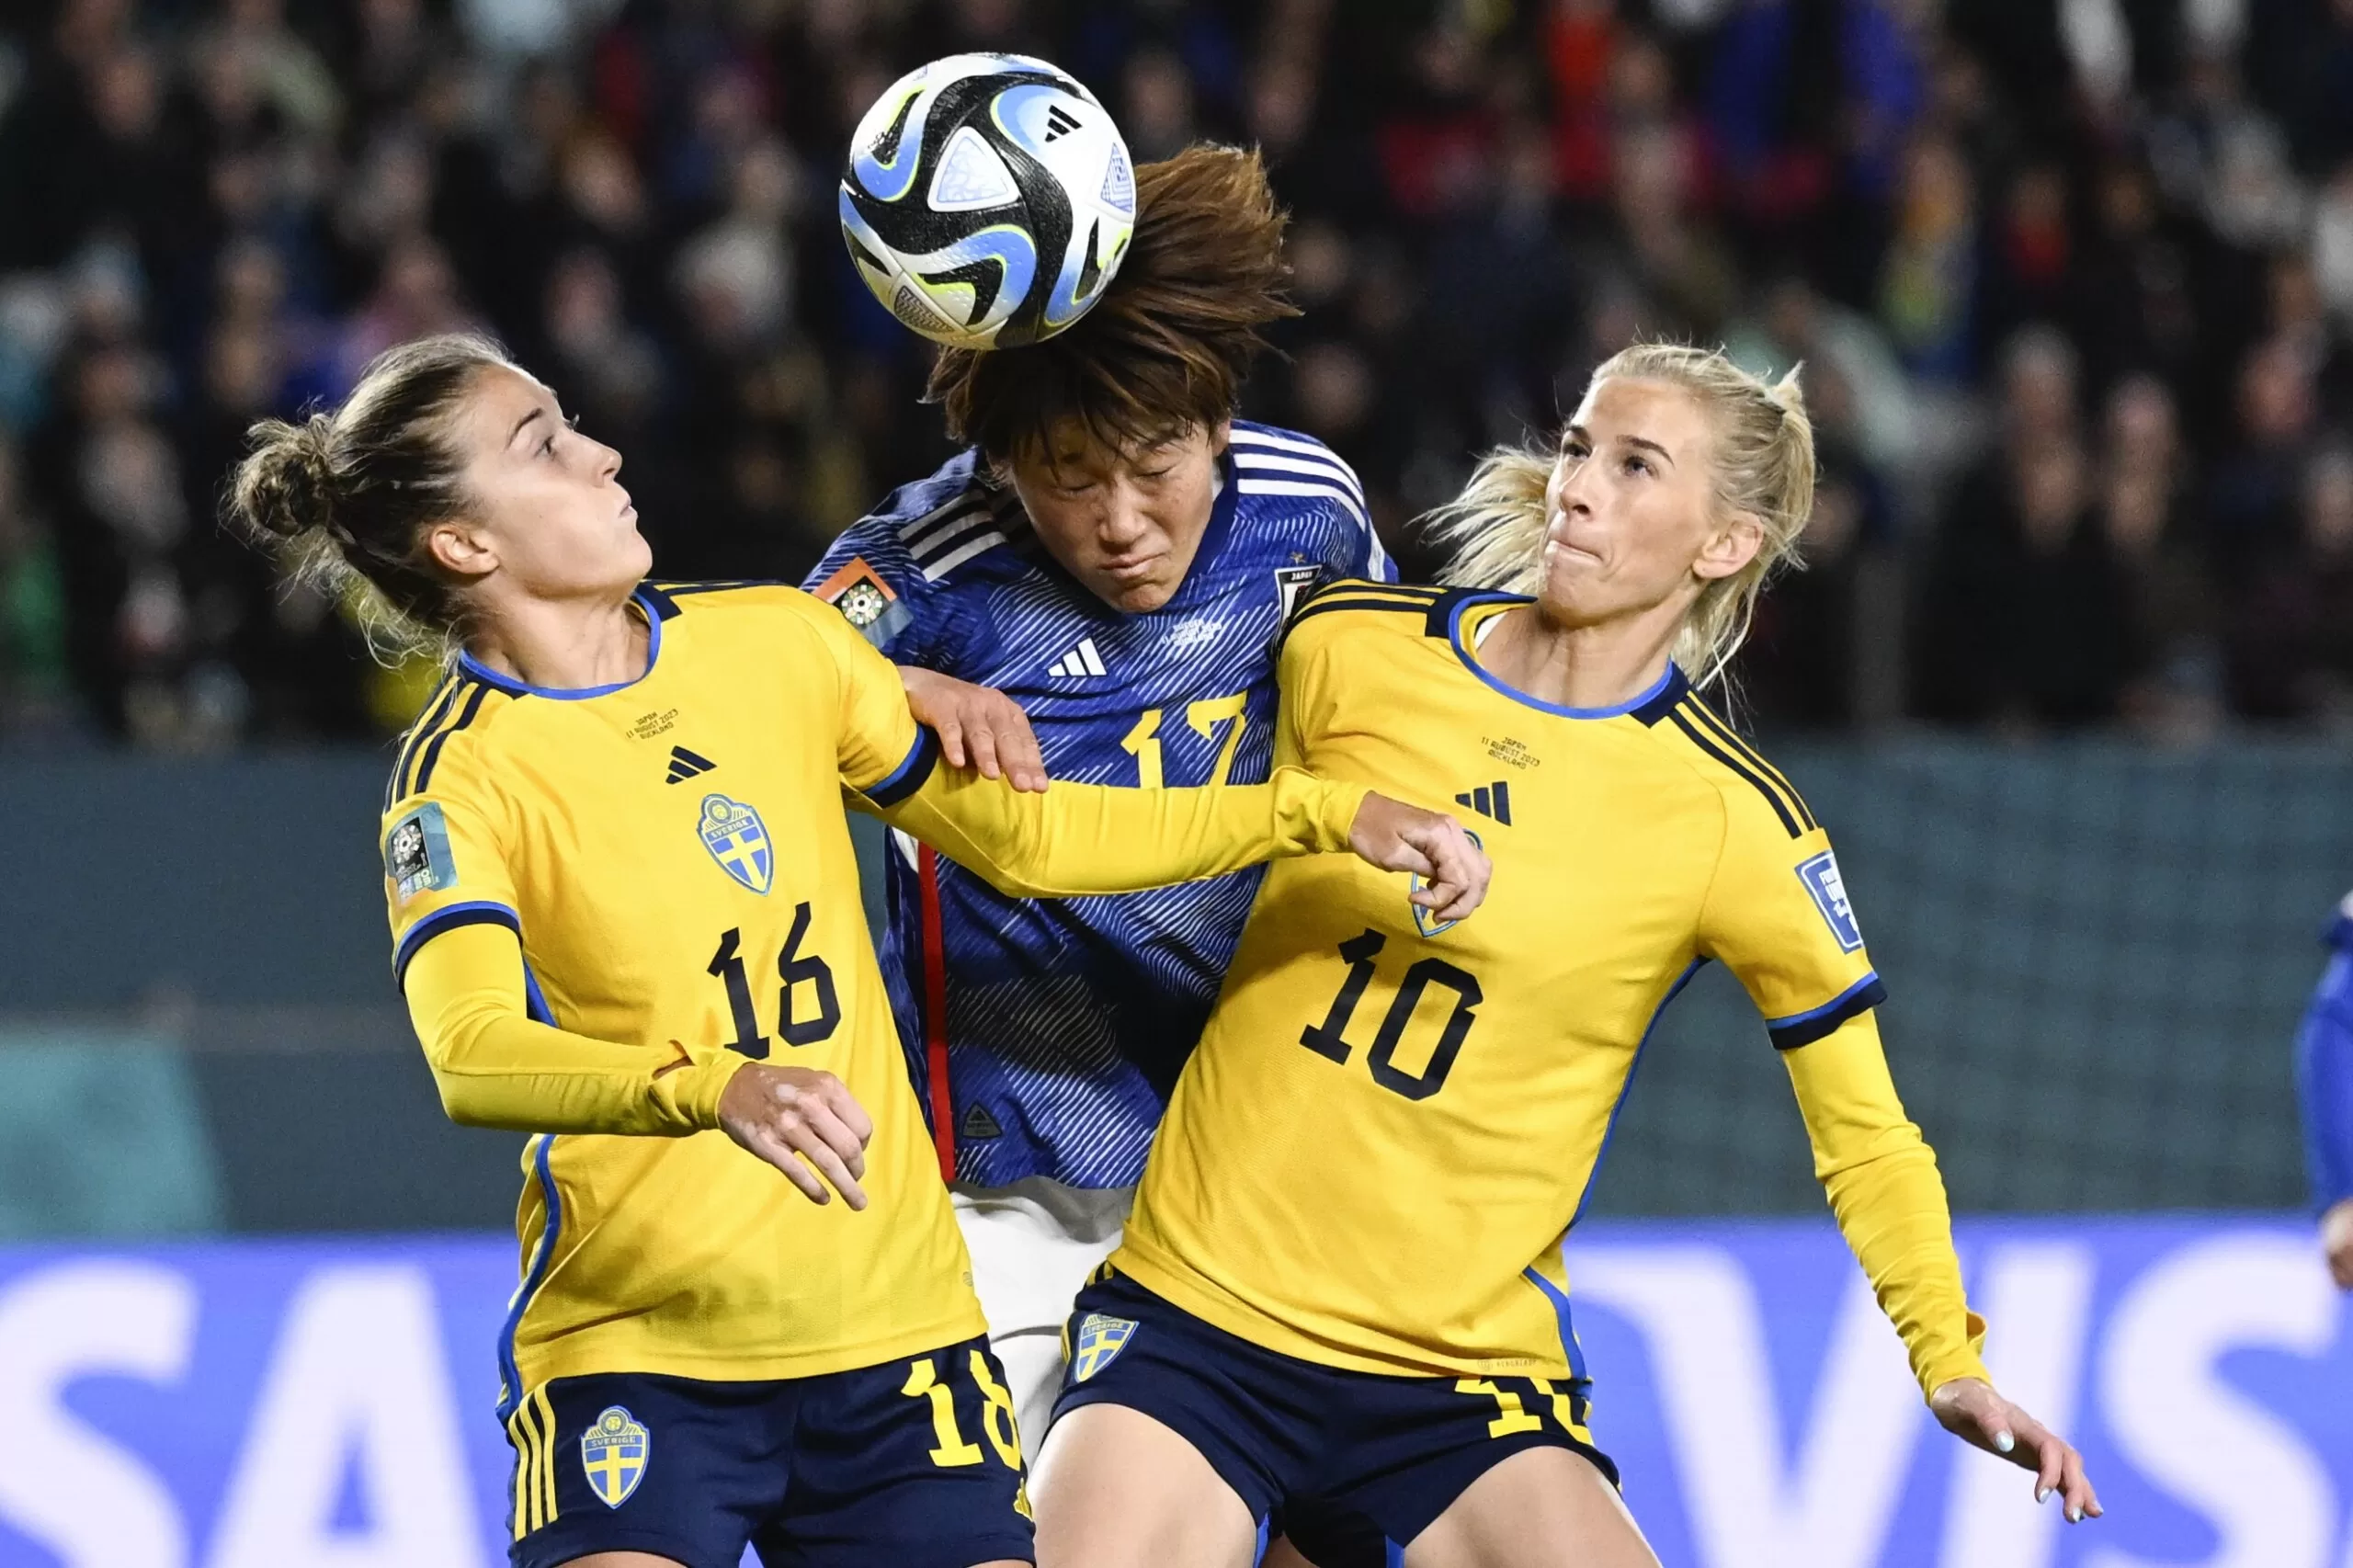 Sweden stakes claim as Women’s World Cup favorite by stopping Japan 2-1 in quarterfinals
